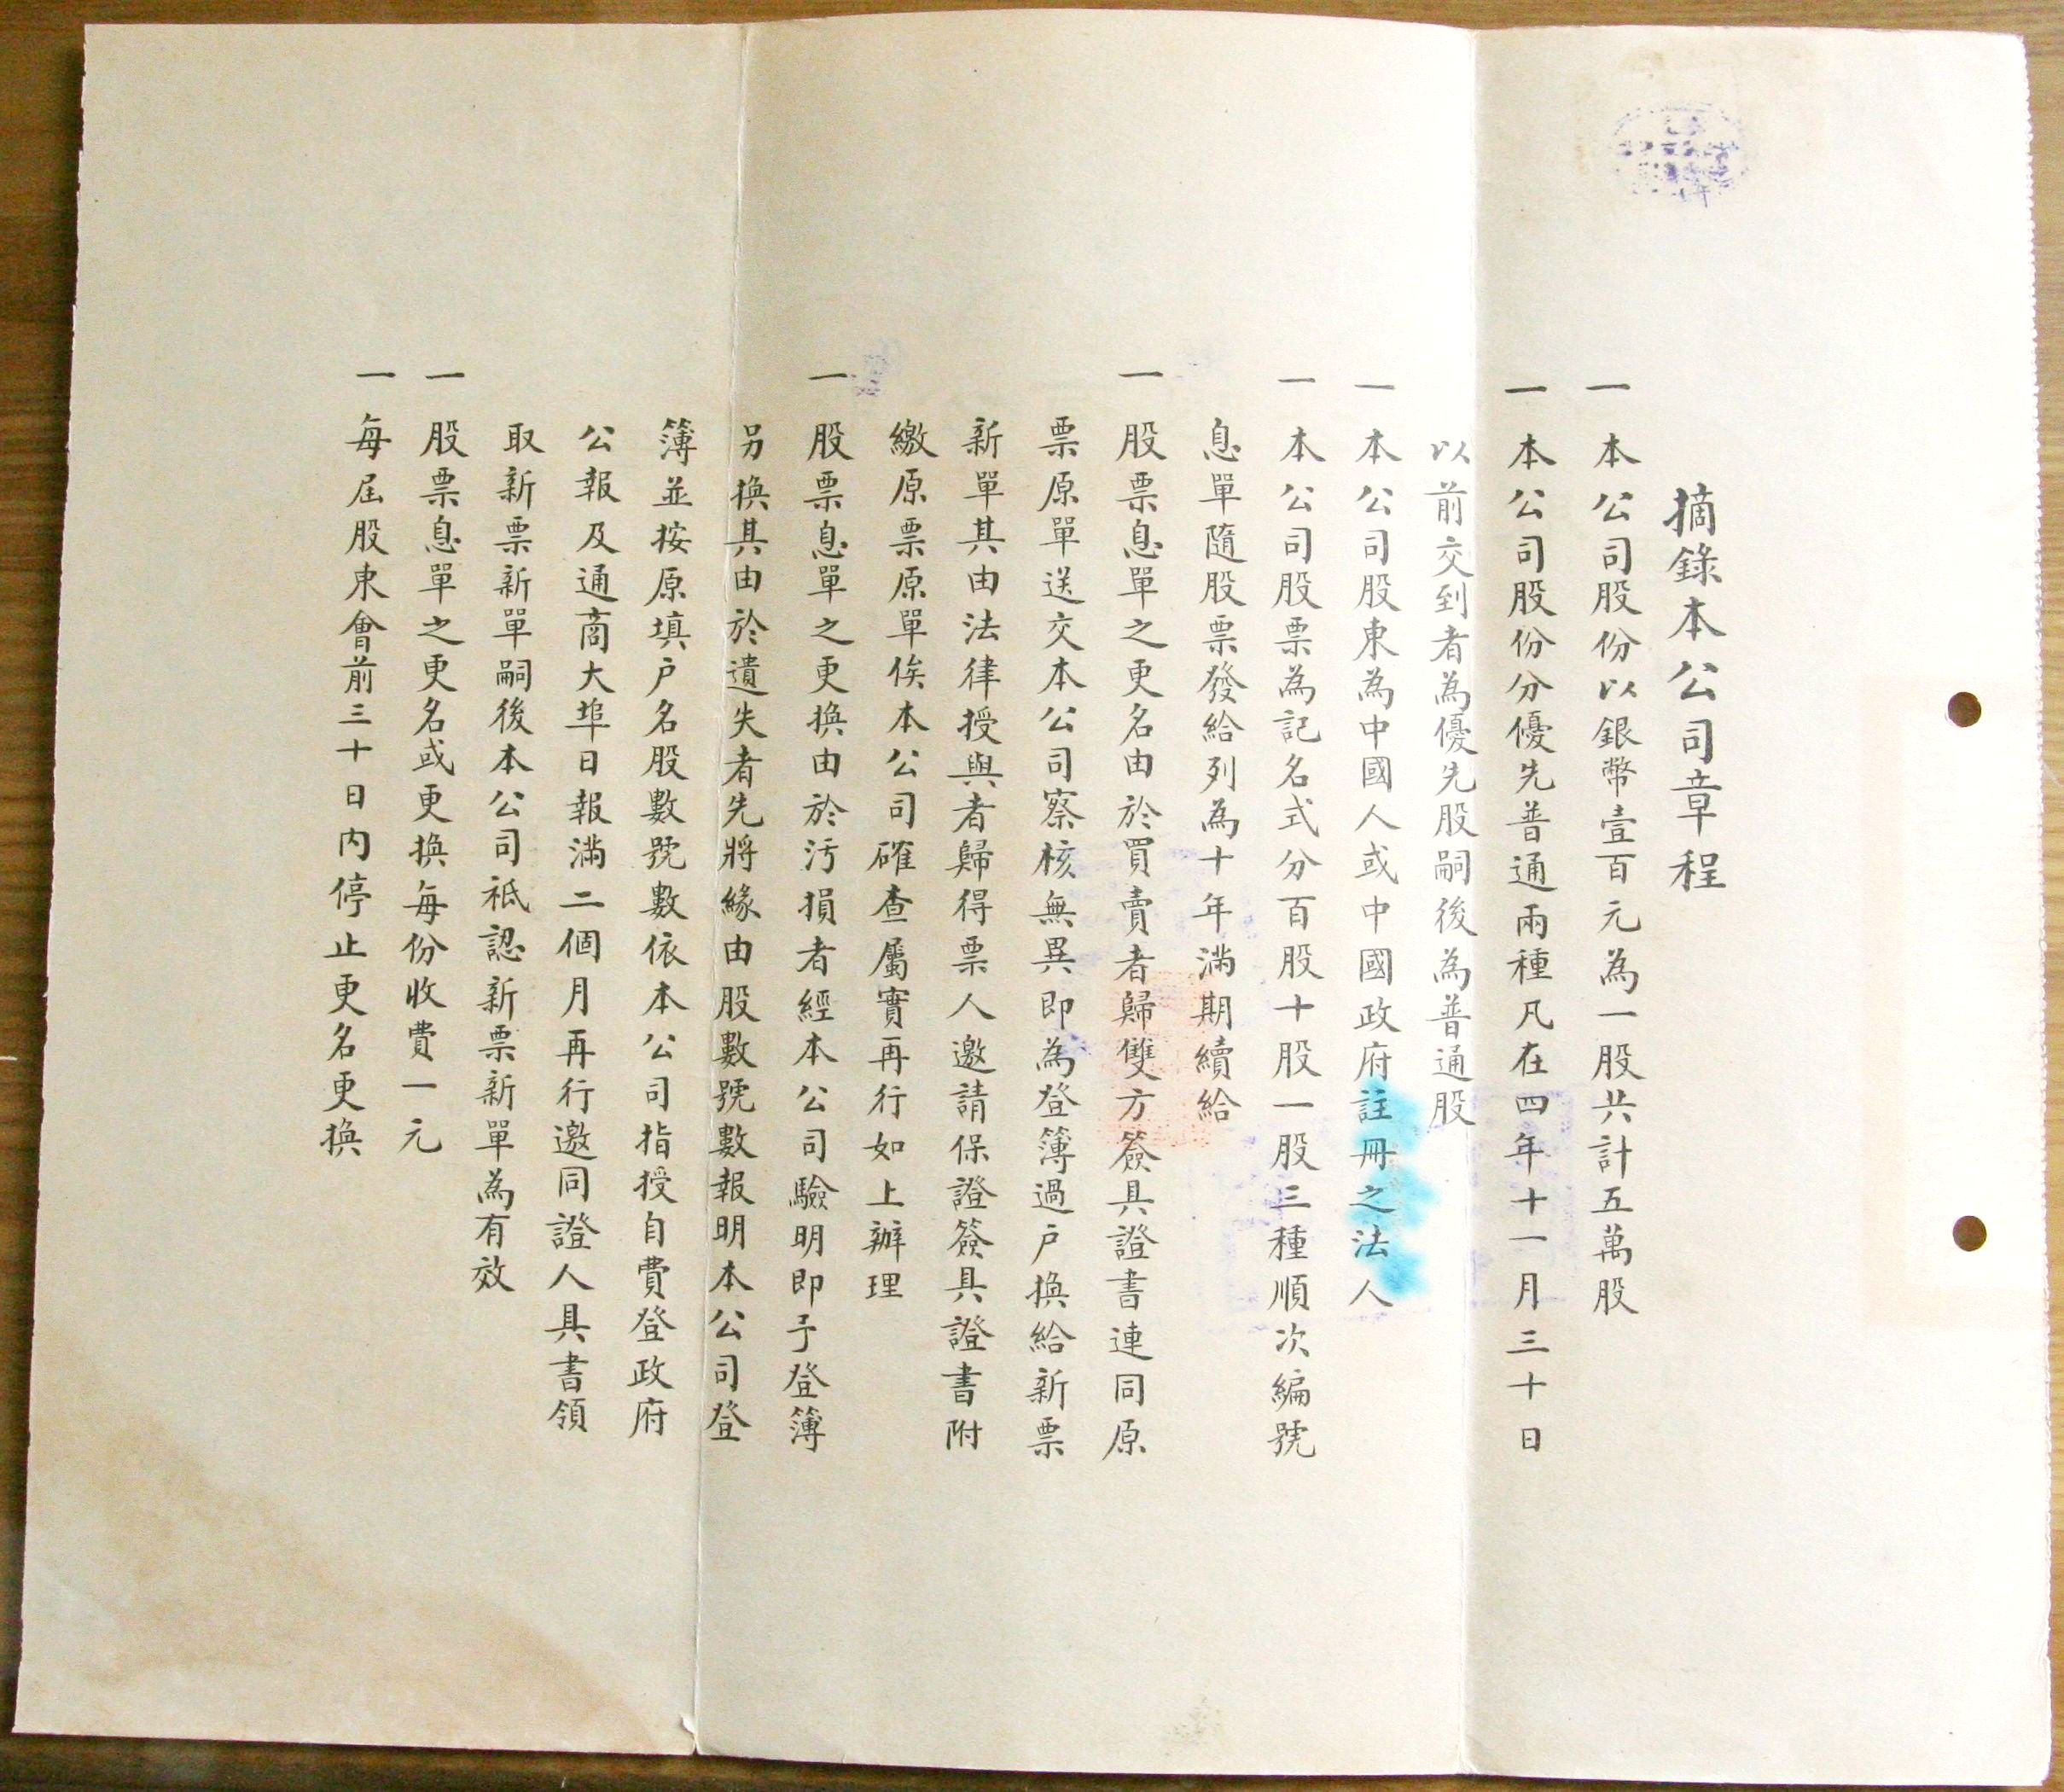 S0172, Tonghui Industries Co., Ltd, Stock of 1 Preferred Shares, China 1937